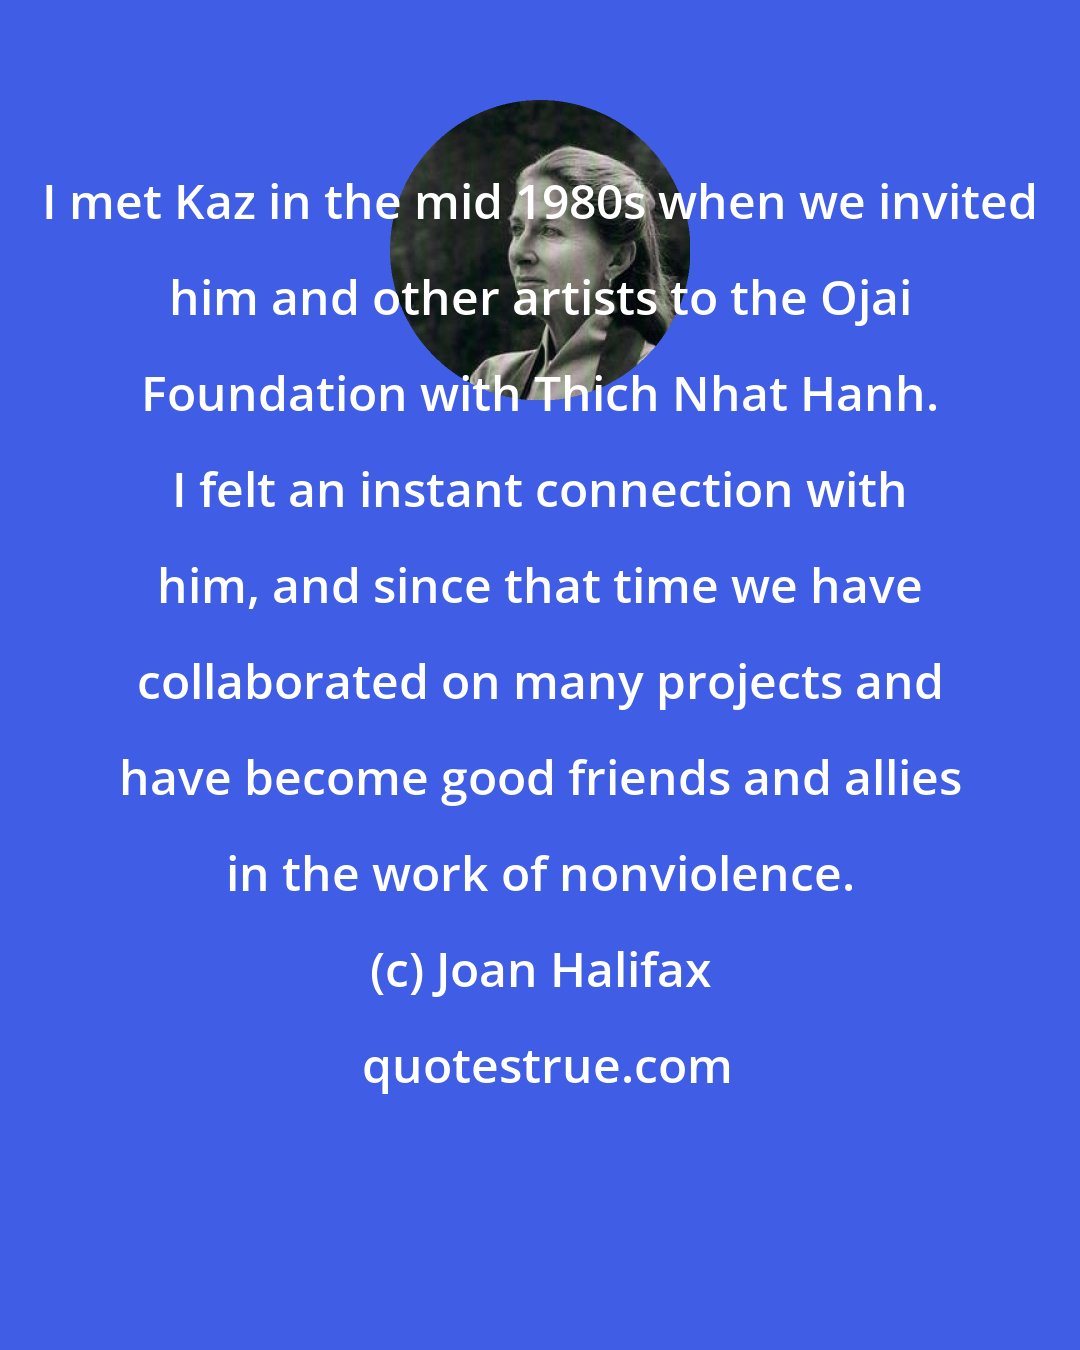 Joan Halifax: I met Kaz in the mid 1980s when we invited him and other artists to the Ojai Foundation with Thich Nhat Hanh. I felt an instant connection with him, and since that time we have collaborated on many projects and have become good friends and allies in the work of nonviolence.